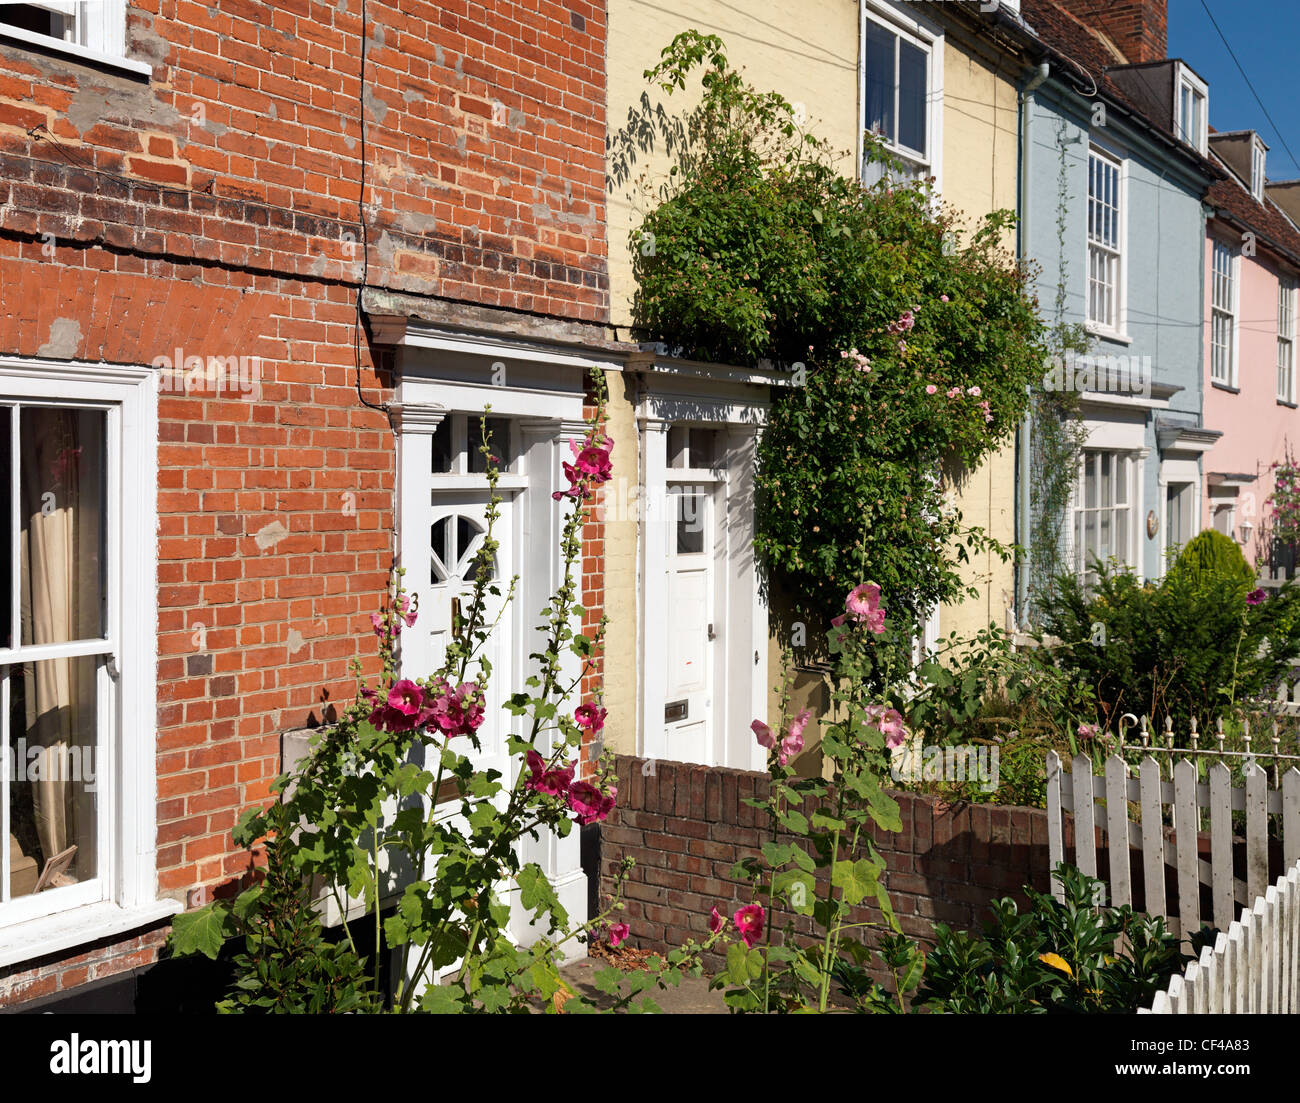 A row of terraced cottages with small gardens. Stock Photo